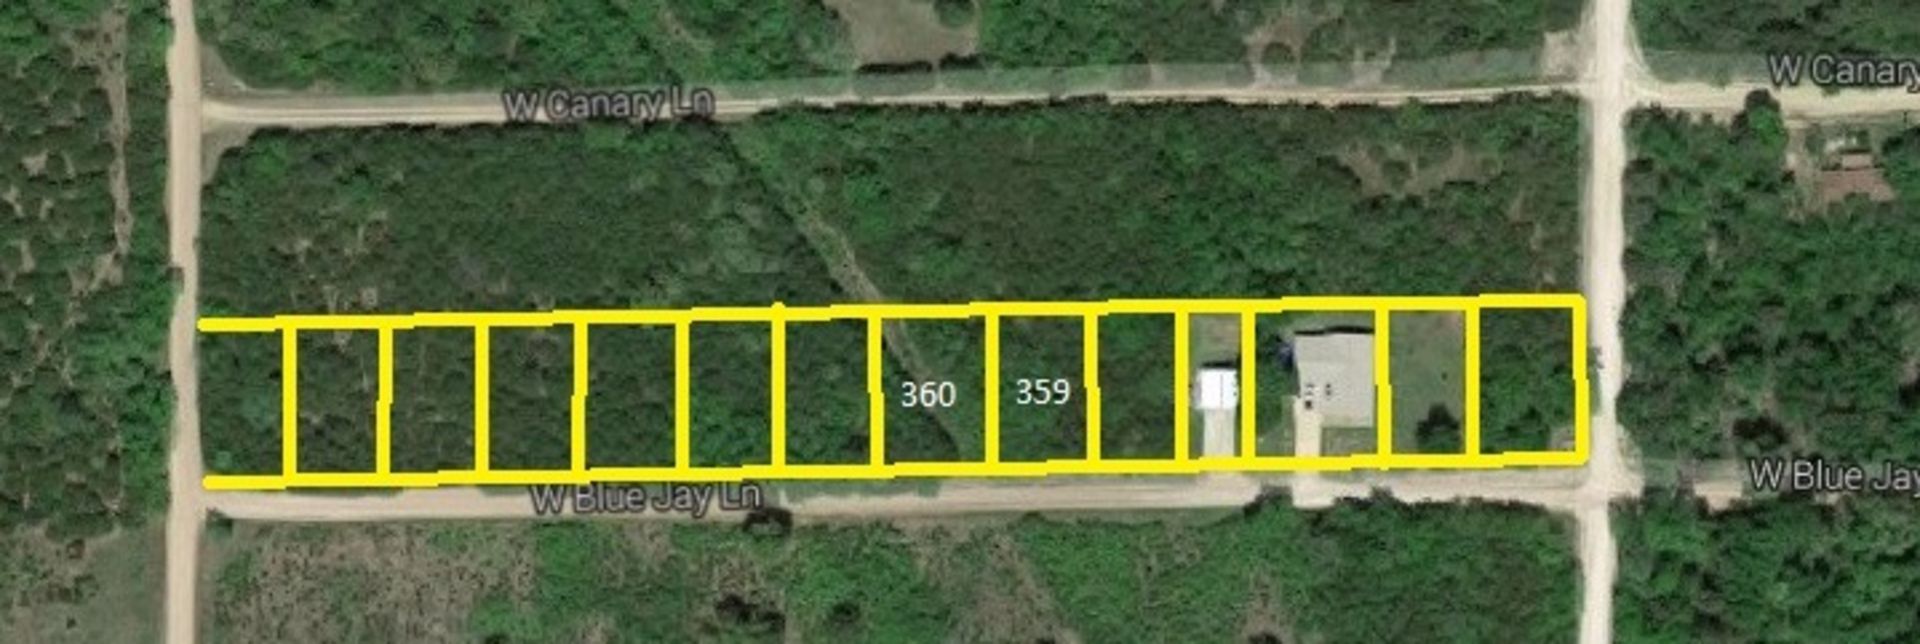 DIAMOND CITY - THE PARADISE IN ARKANSAS!!! YOU ARE BUYING 2 PLOTS OF LAND - LOT 359 AND 360 - Image 2 of 12